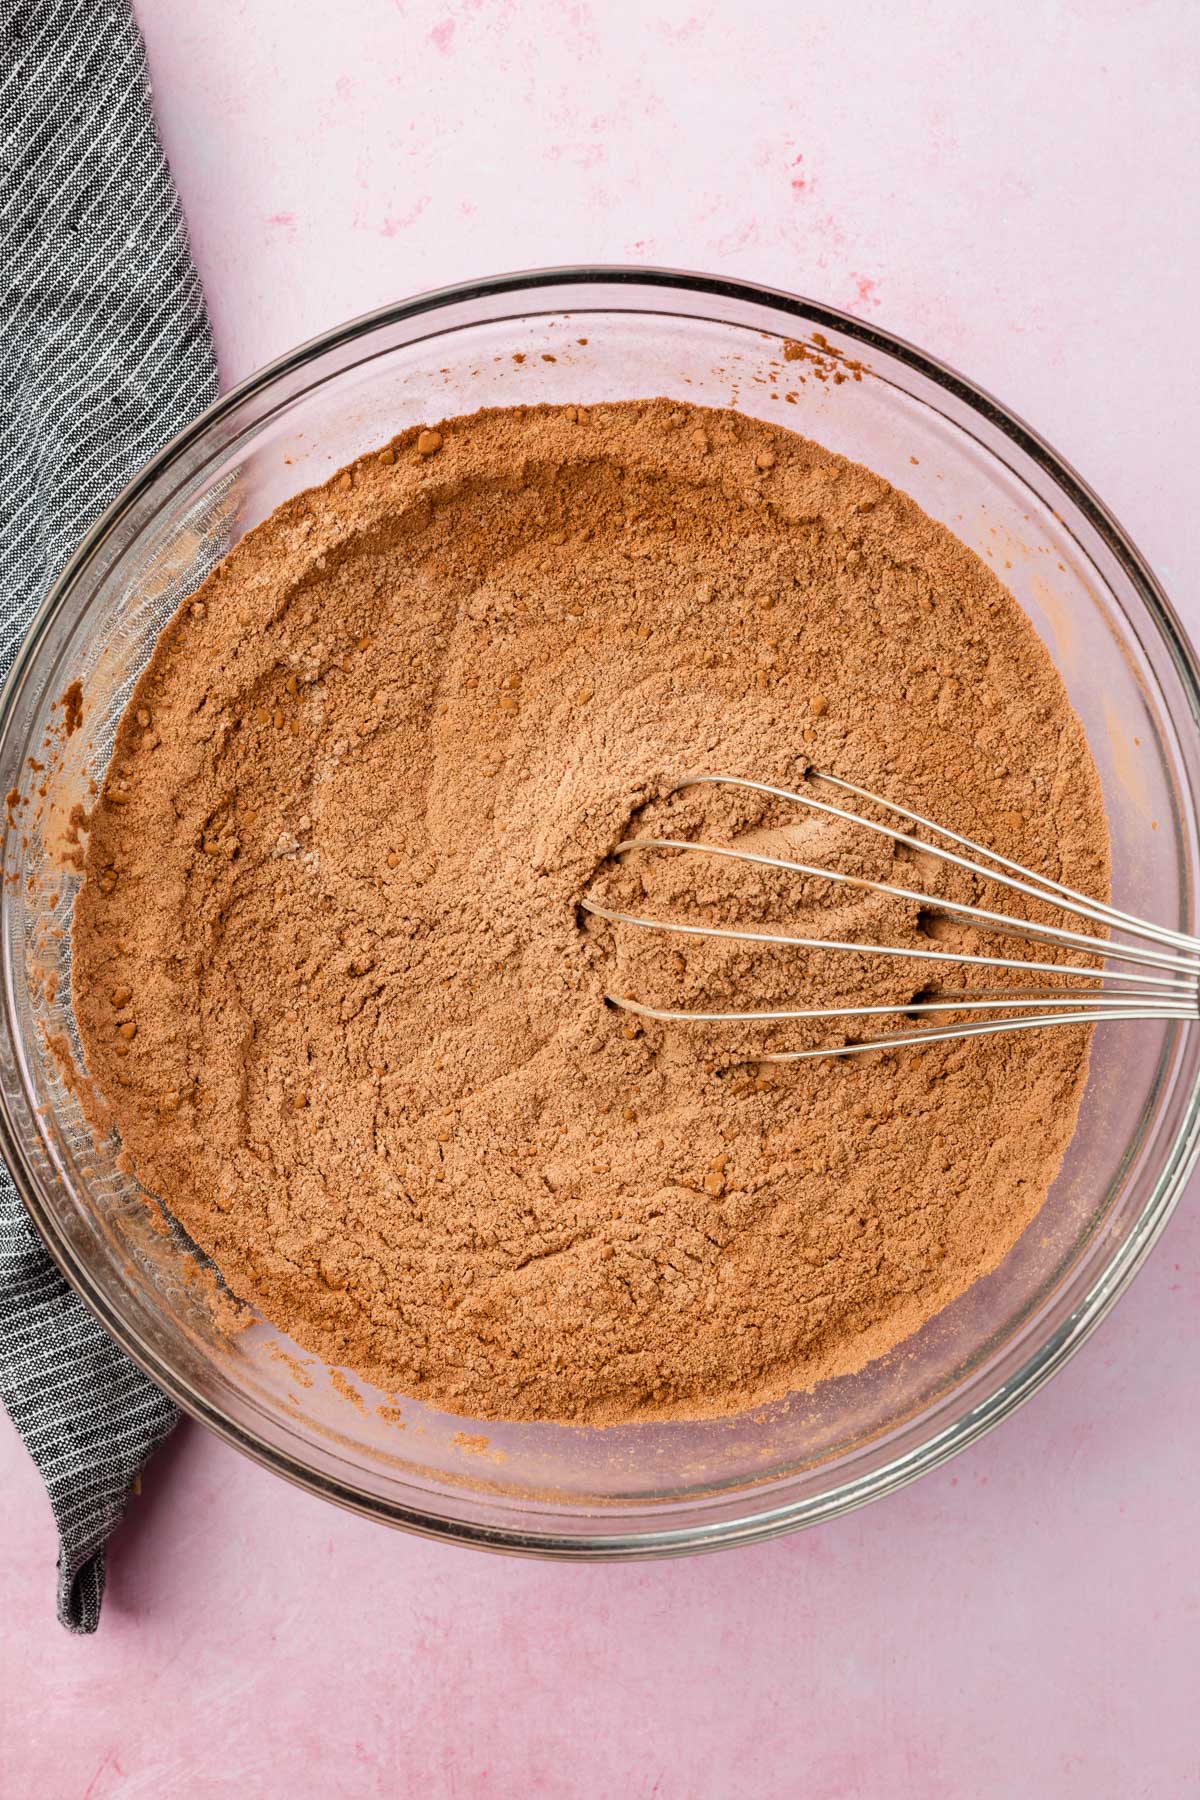 A glass mixing bowl with cocoa powder and flour mixture with a whisk in it.